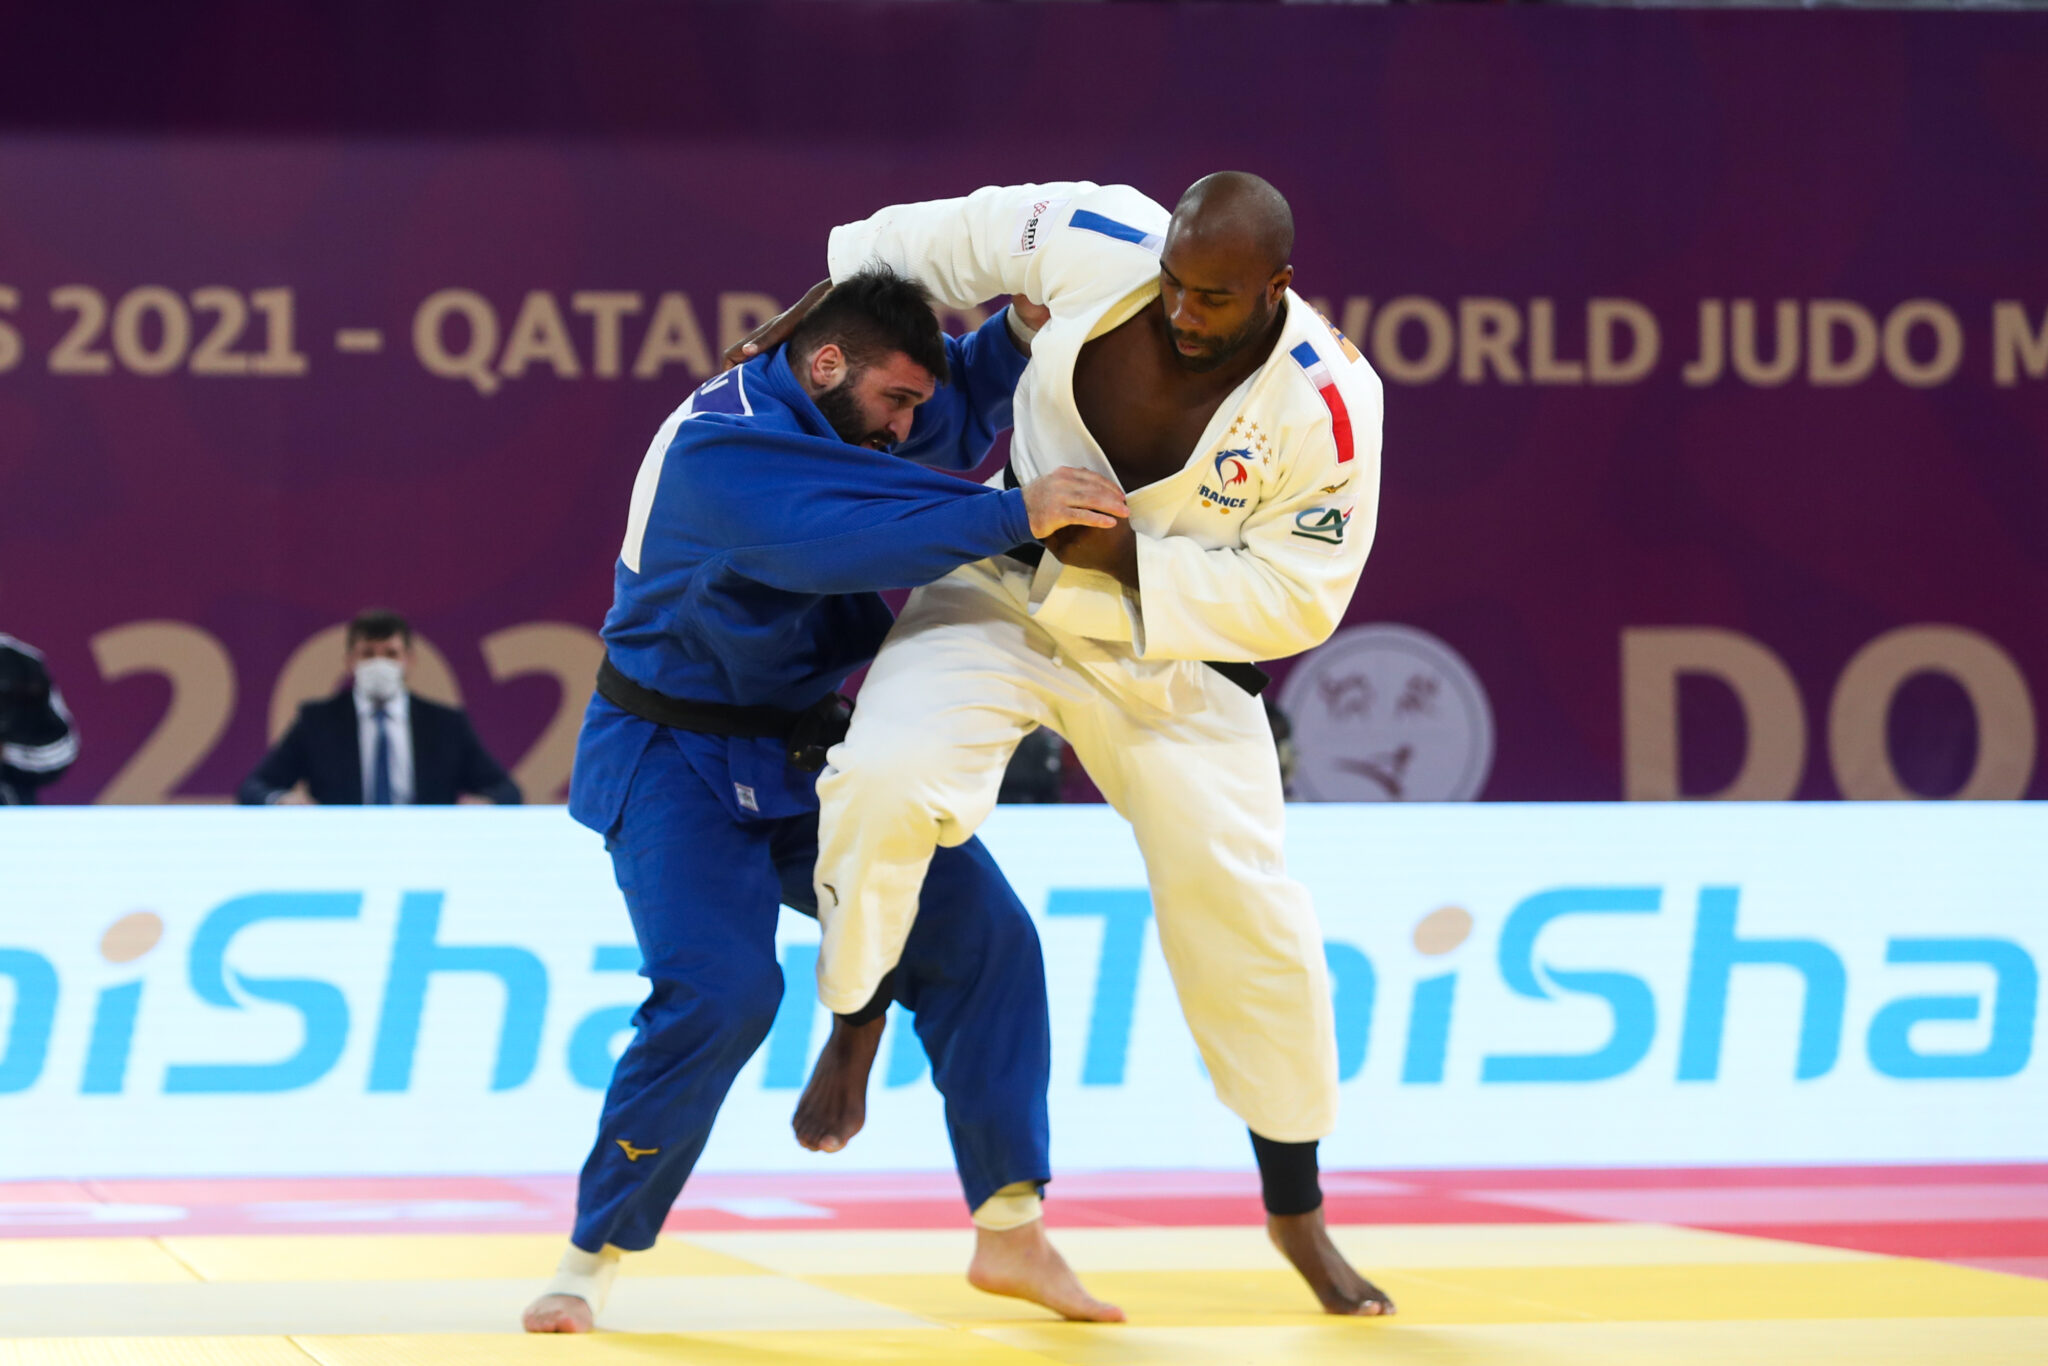 FRANCE POSE HUGE THREAT IN THE HEAVYWEIGHT CATEGORIES